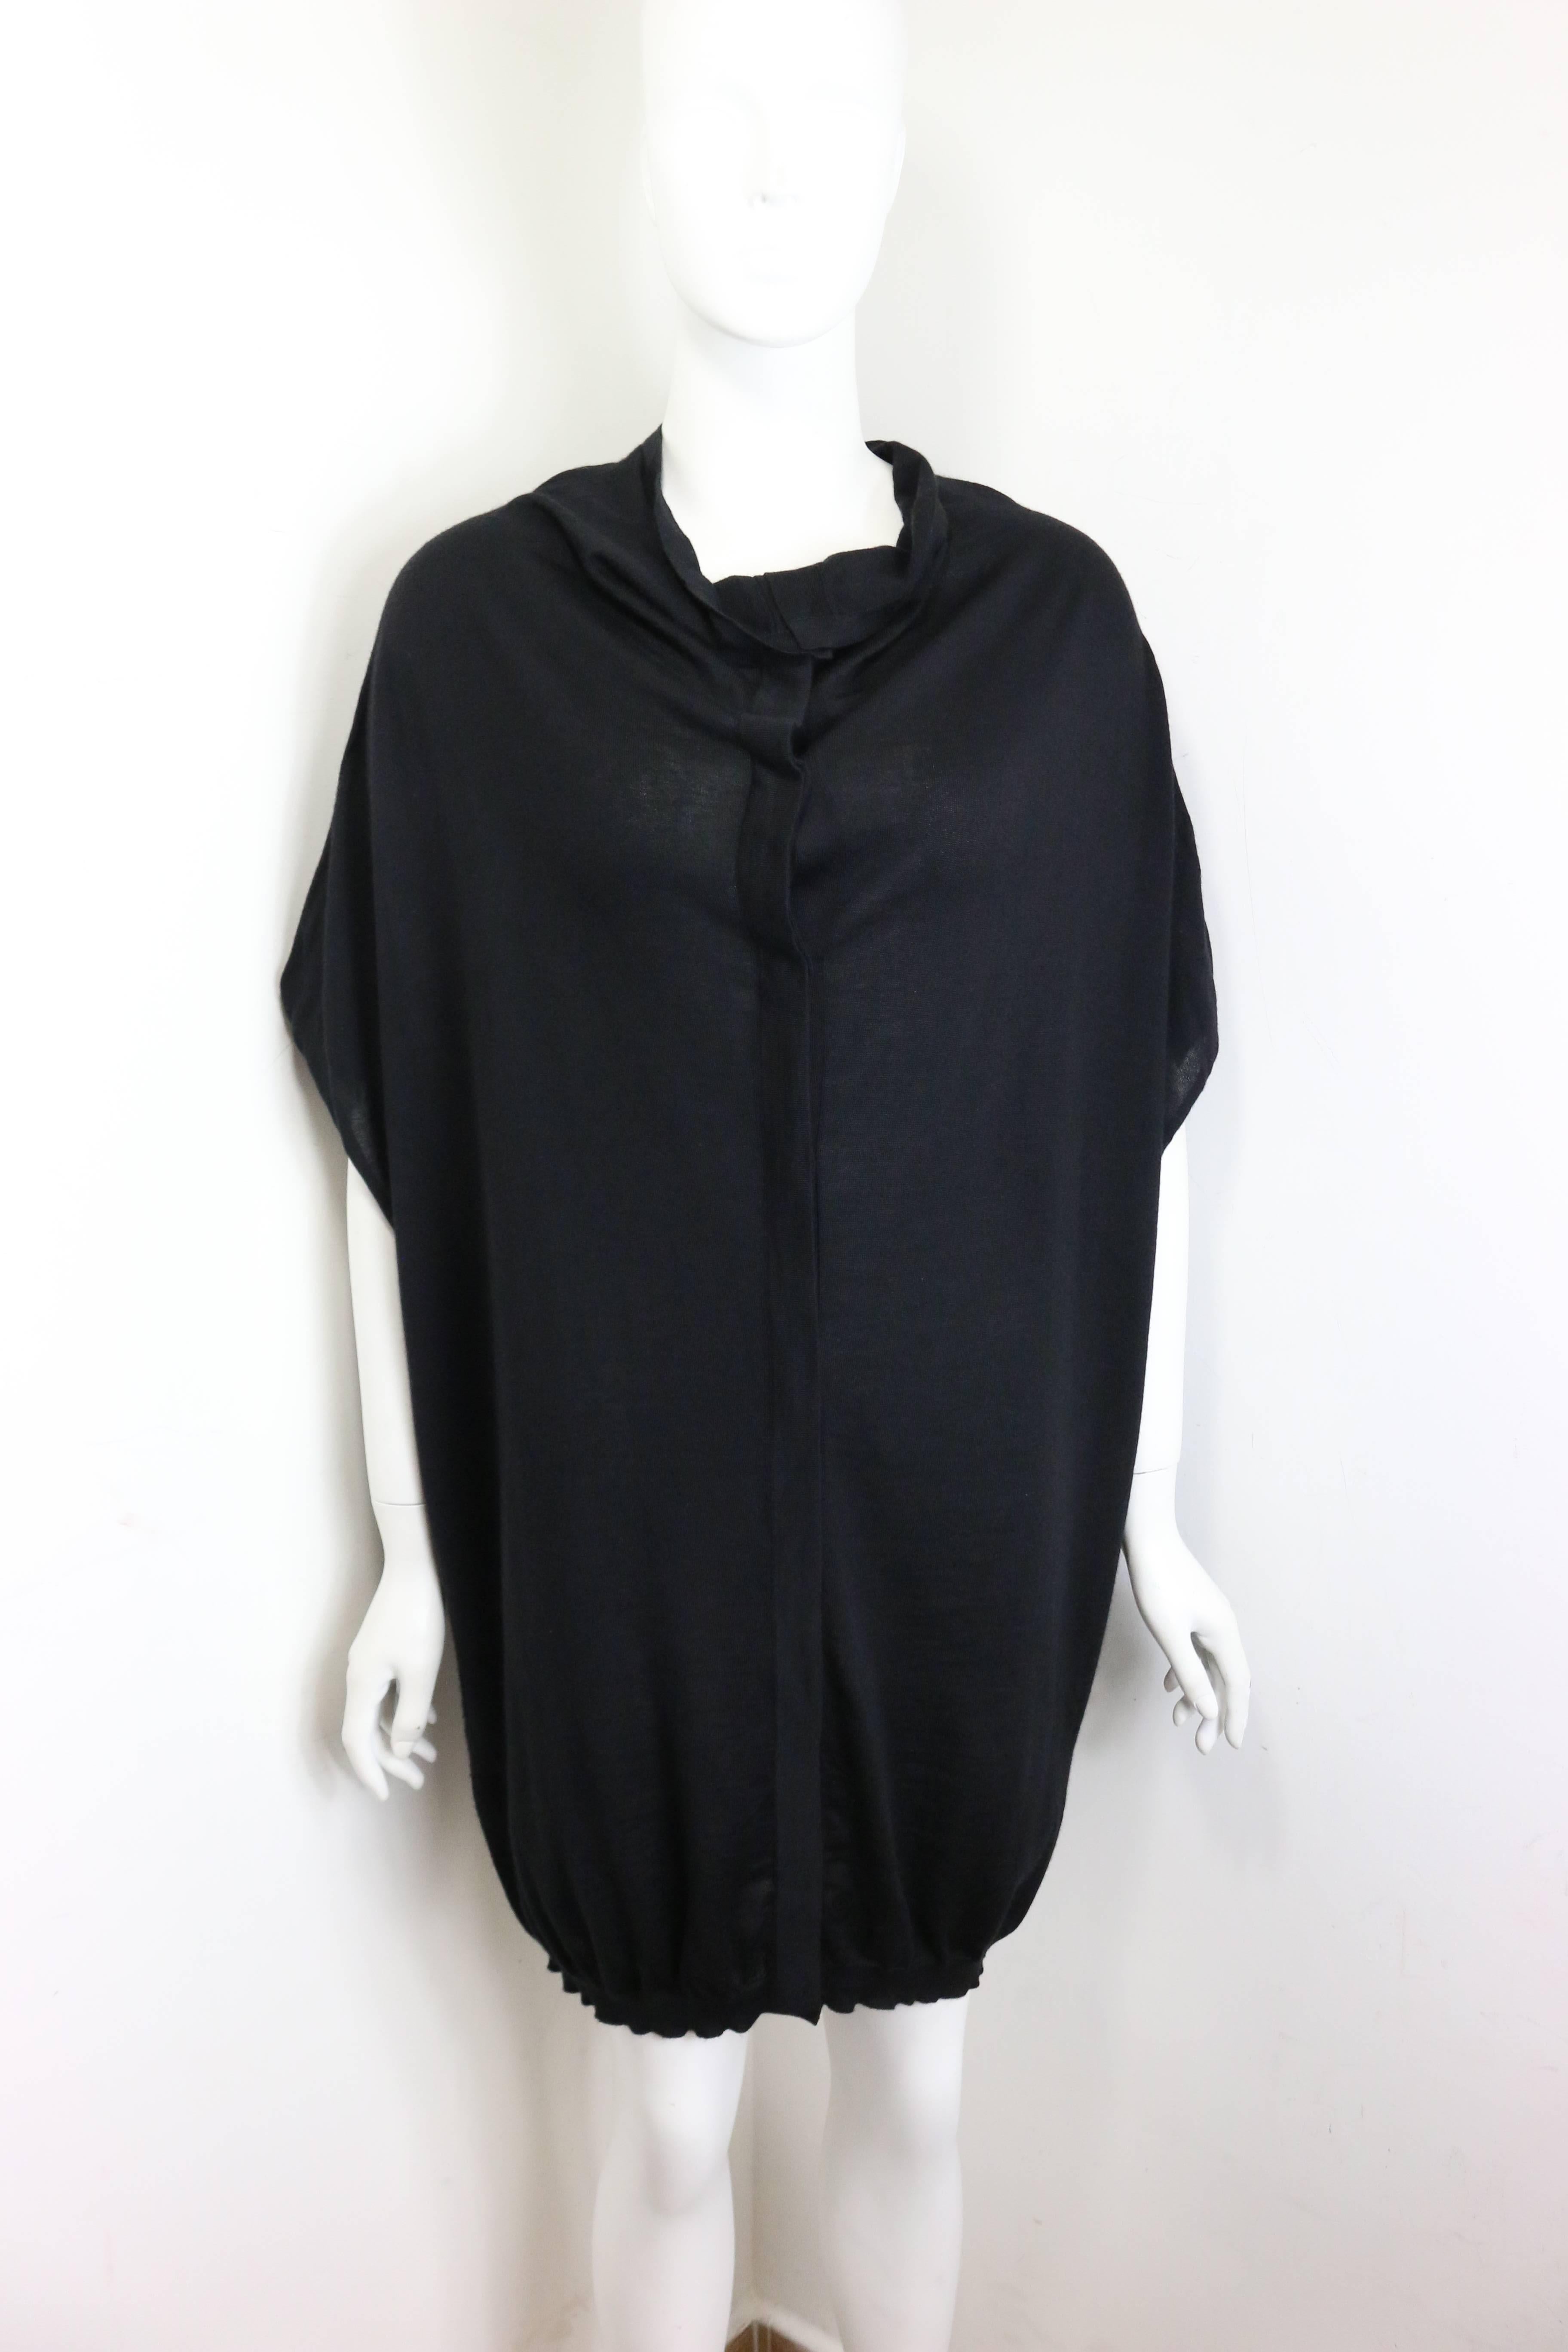 - Jil Sander by Raf Simons cashmere and silk sleeveless oversize top. Featuring ten black buttons closure. 

- Made in Italy. 

- Size 38. 

- 70% Cashmere, 30% Silk. 

